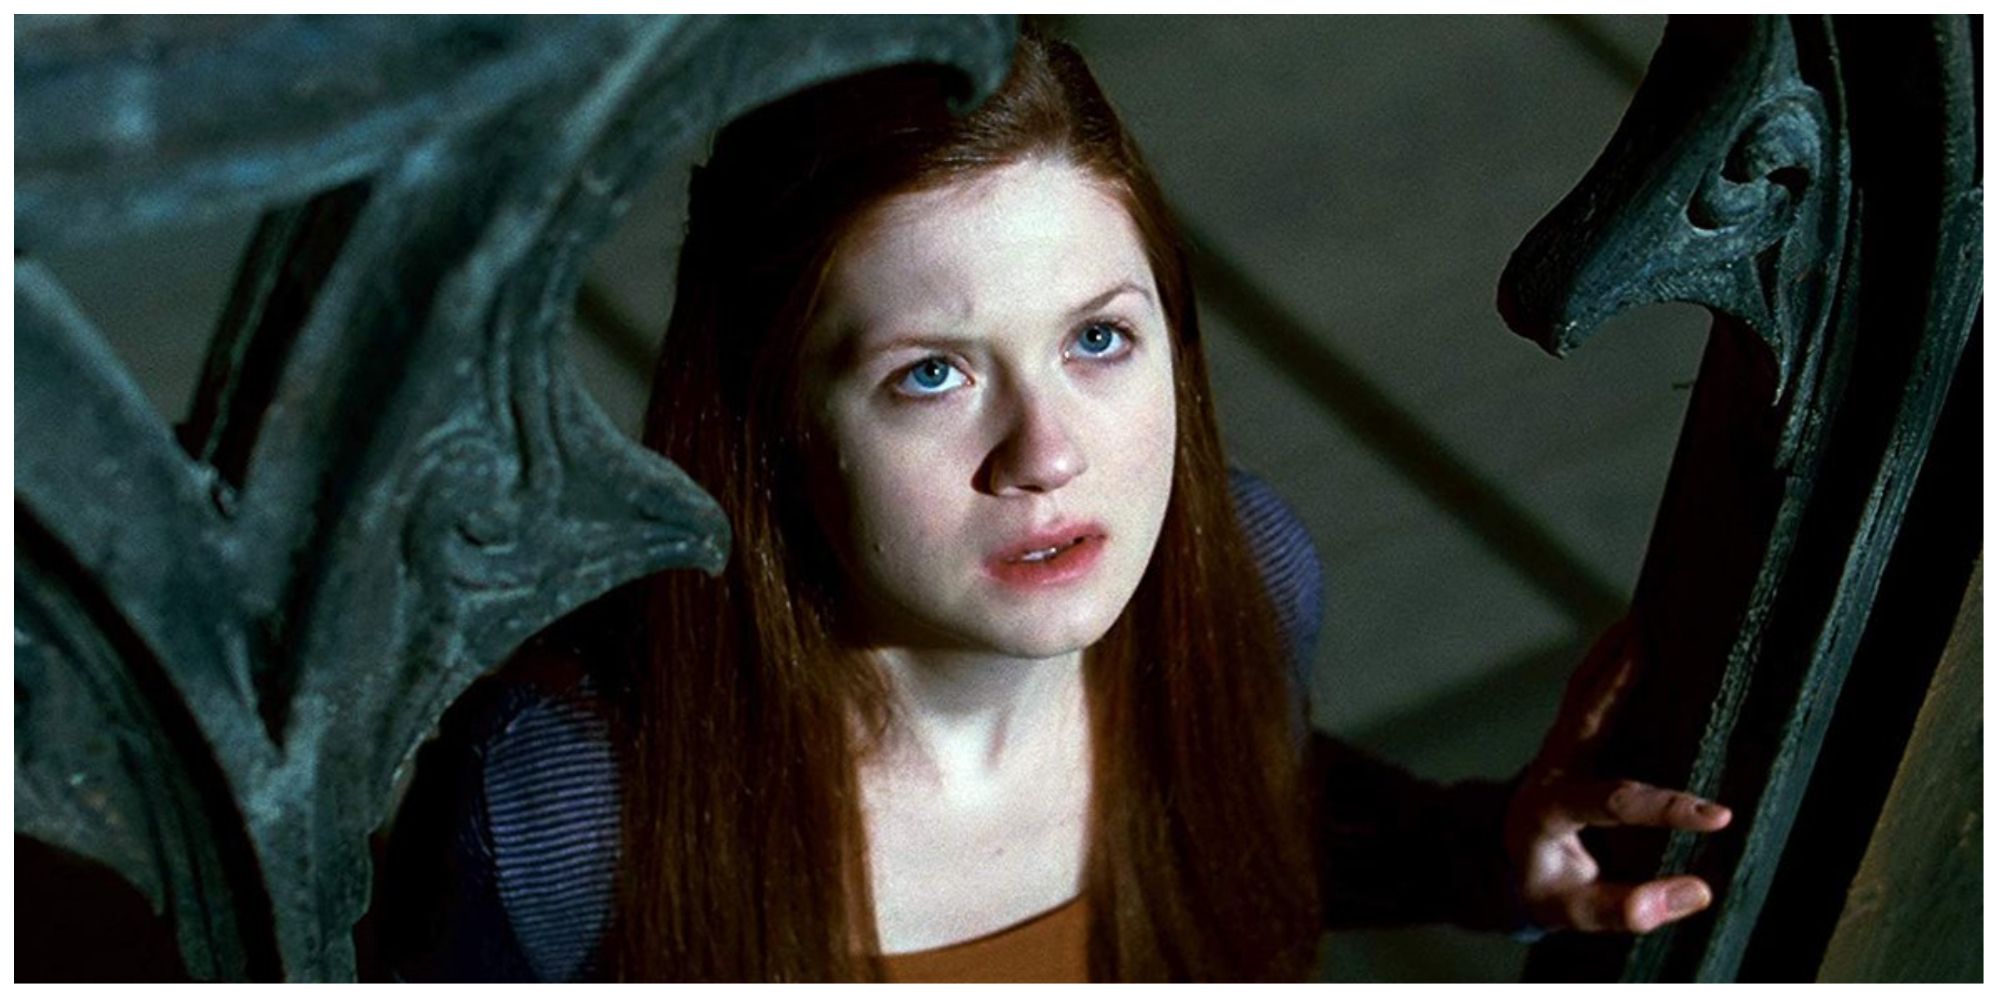 Bonnie Wright as Ginny Weasley in the Harry Potter franchise